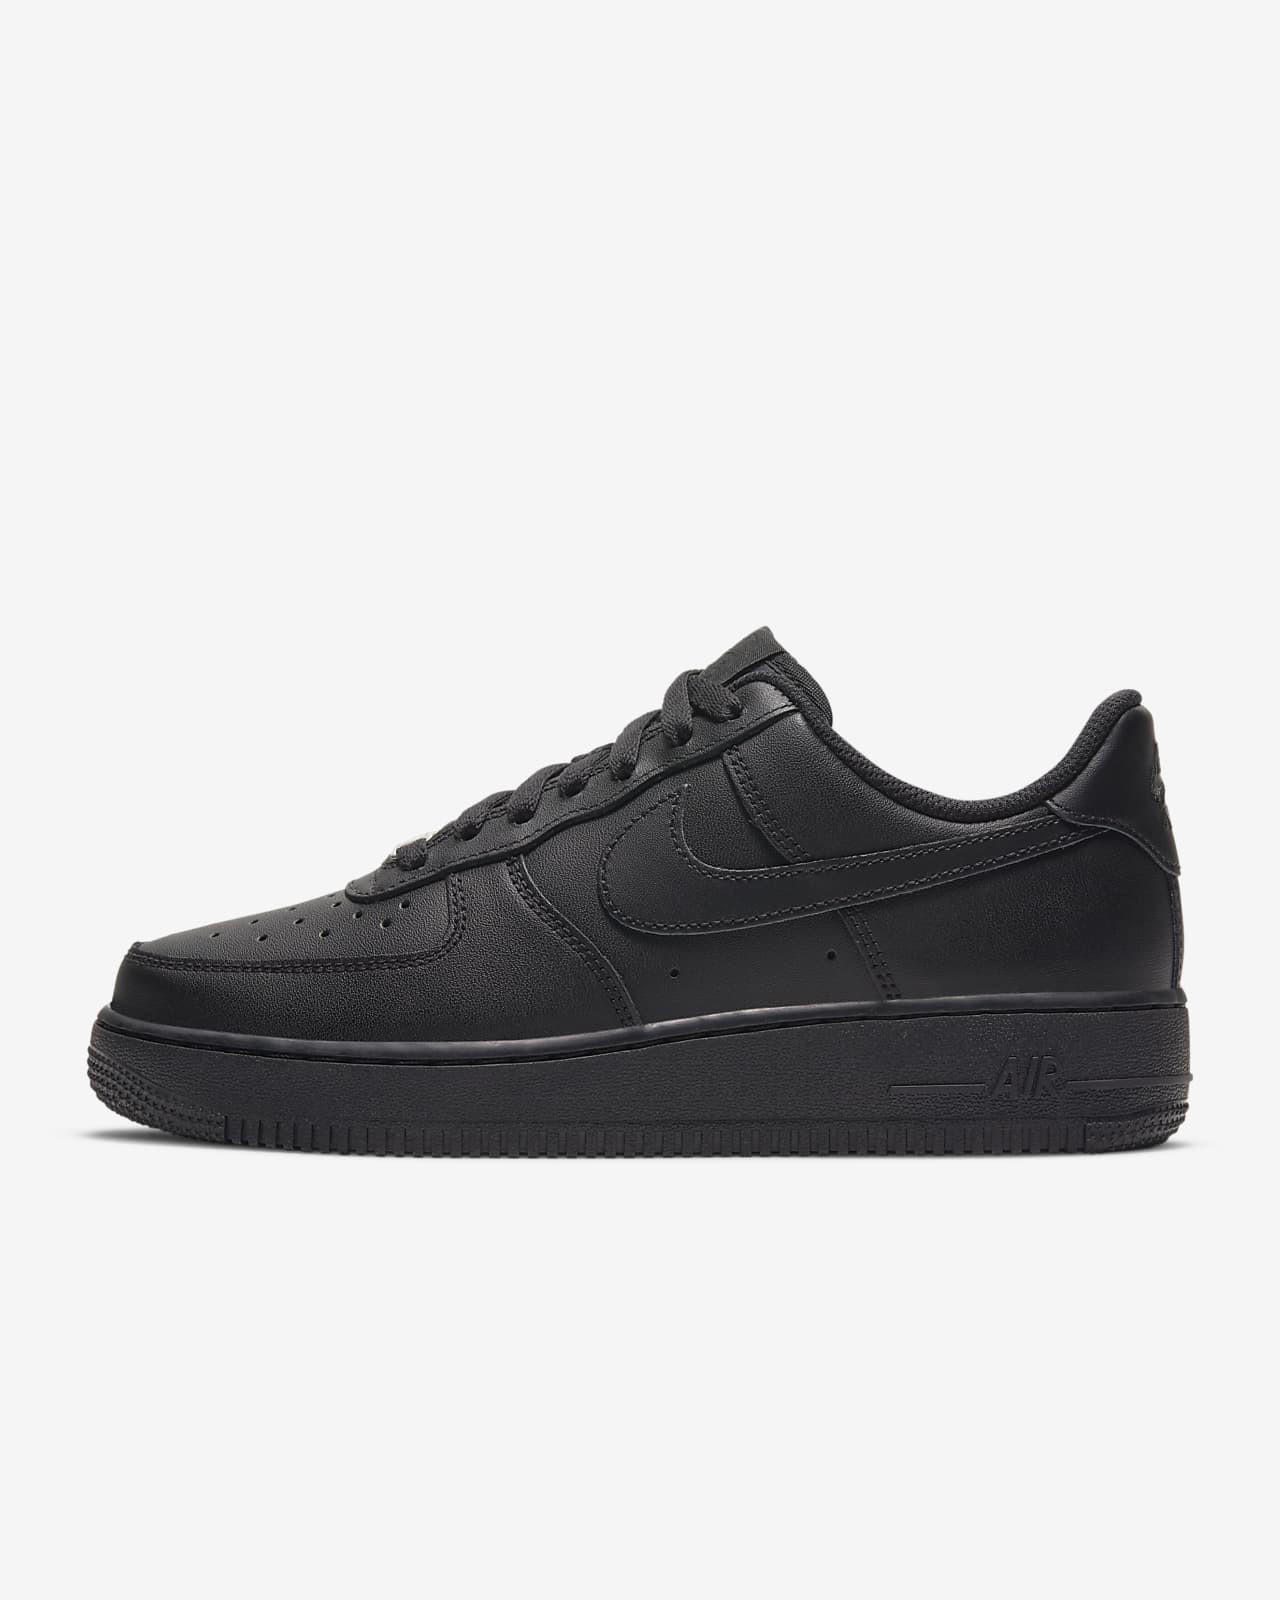 Chaussure Nike Air Force 1 '07 pour Femme. Nike CA